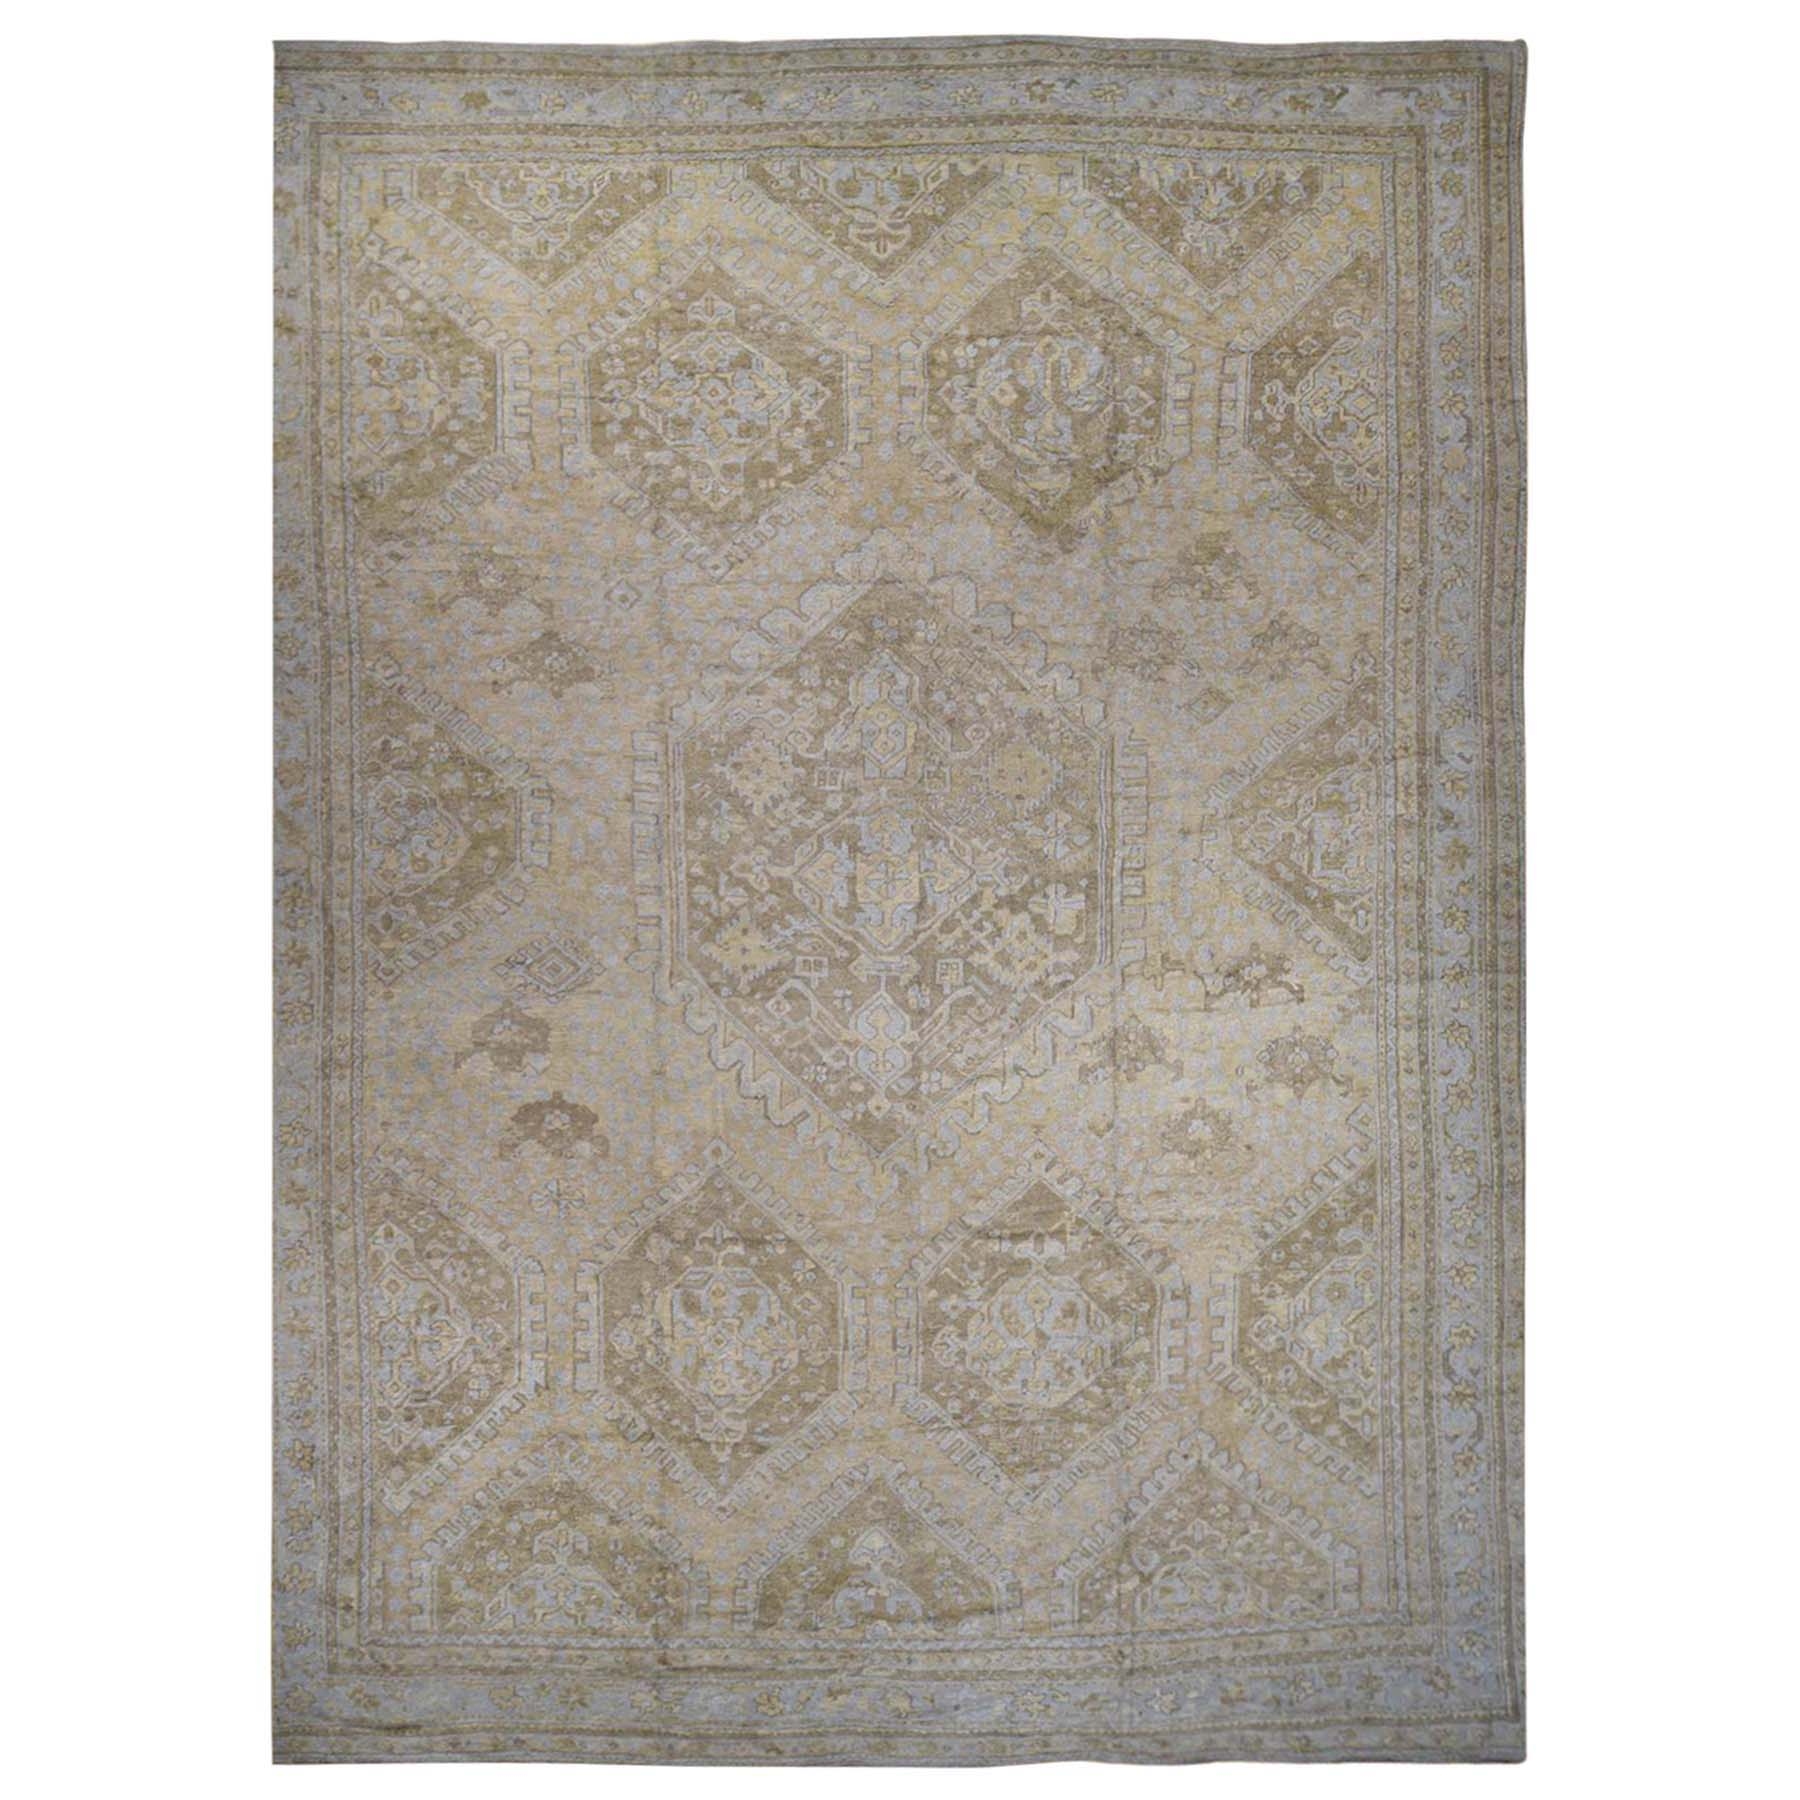 19'2''X24'7'' Hand-Knotted Antique Turkish Oushak Exc Cond Oversize Oriental Rug moac906b